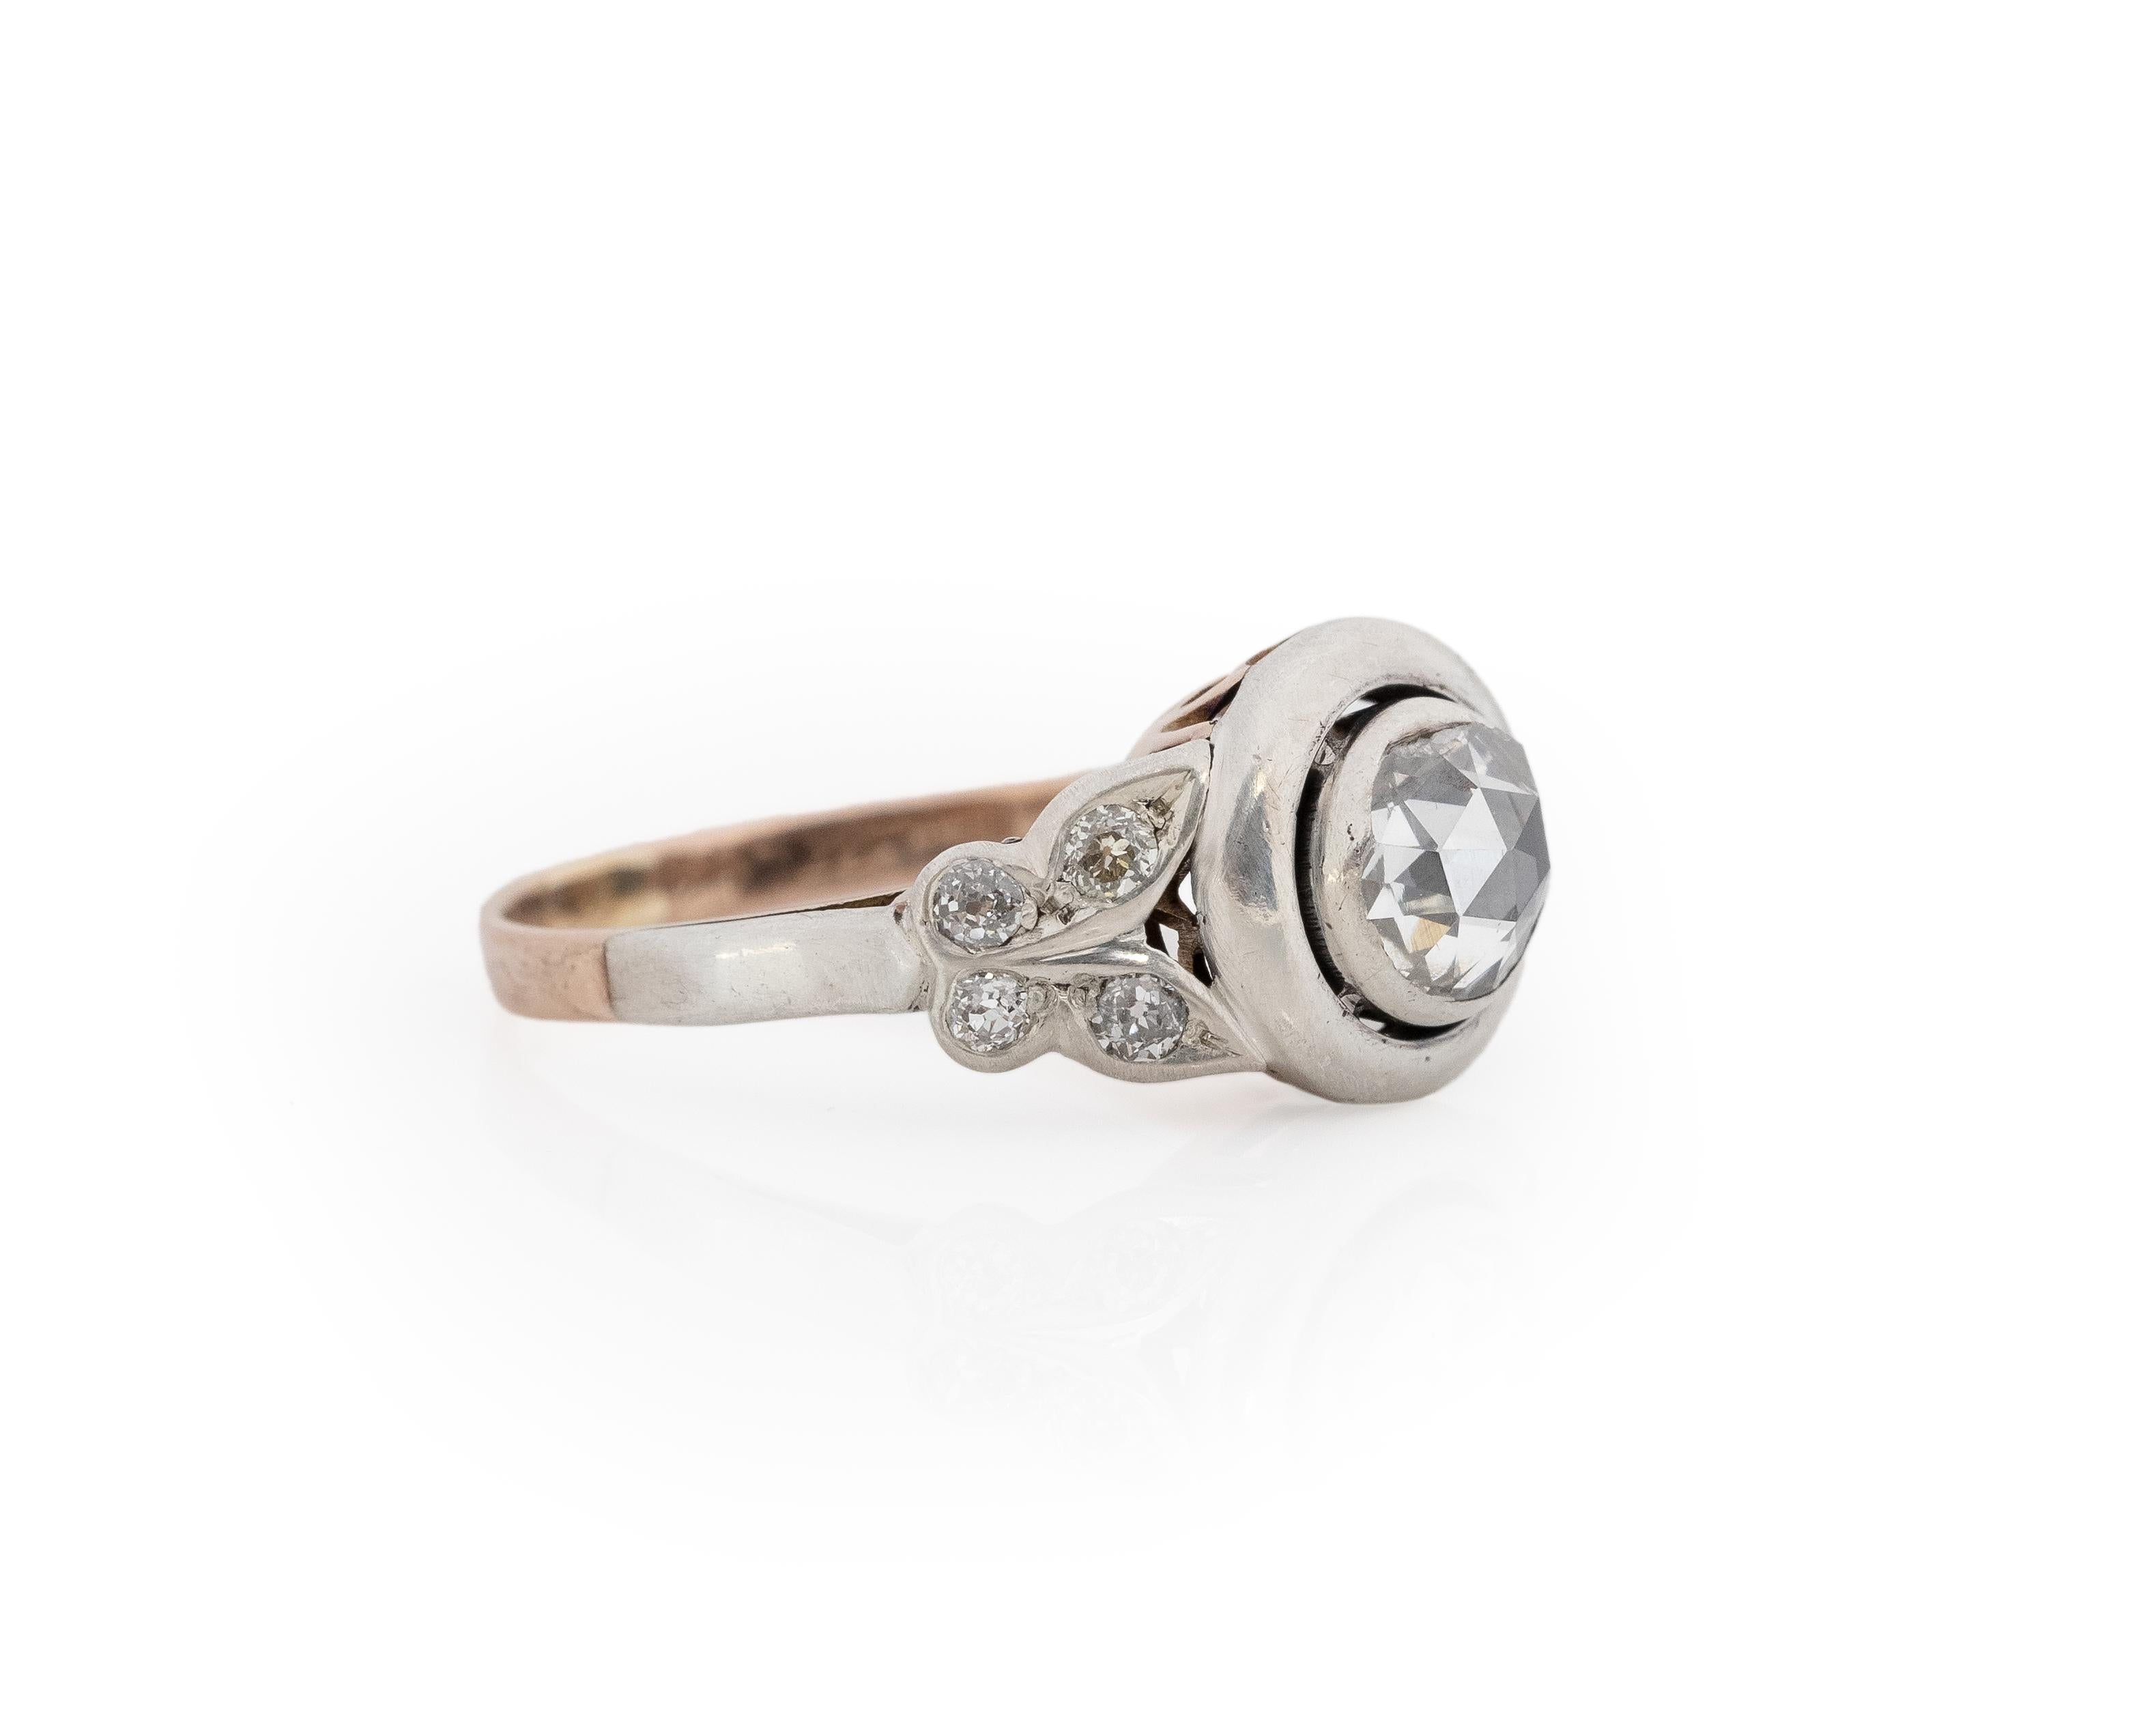 Year: 1900s

Item Details:
Ring Size: 7.5
Metal Type: 14K Rose Gold and Platinum Top [Hallmarked, and Tested]
Weight: 3.7 grams

Center Diamond Details:
Weight: 1.00ct total weight
Cut: Antique Rose Cut
Color: J
Clarity: SI2
Type: Natural

Side